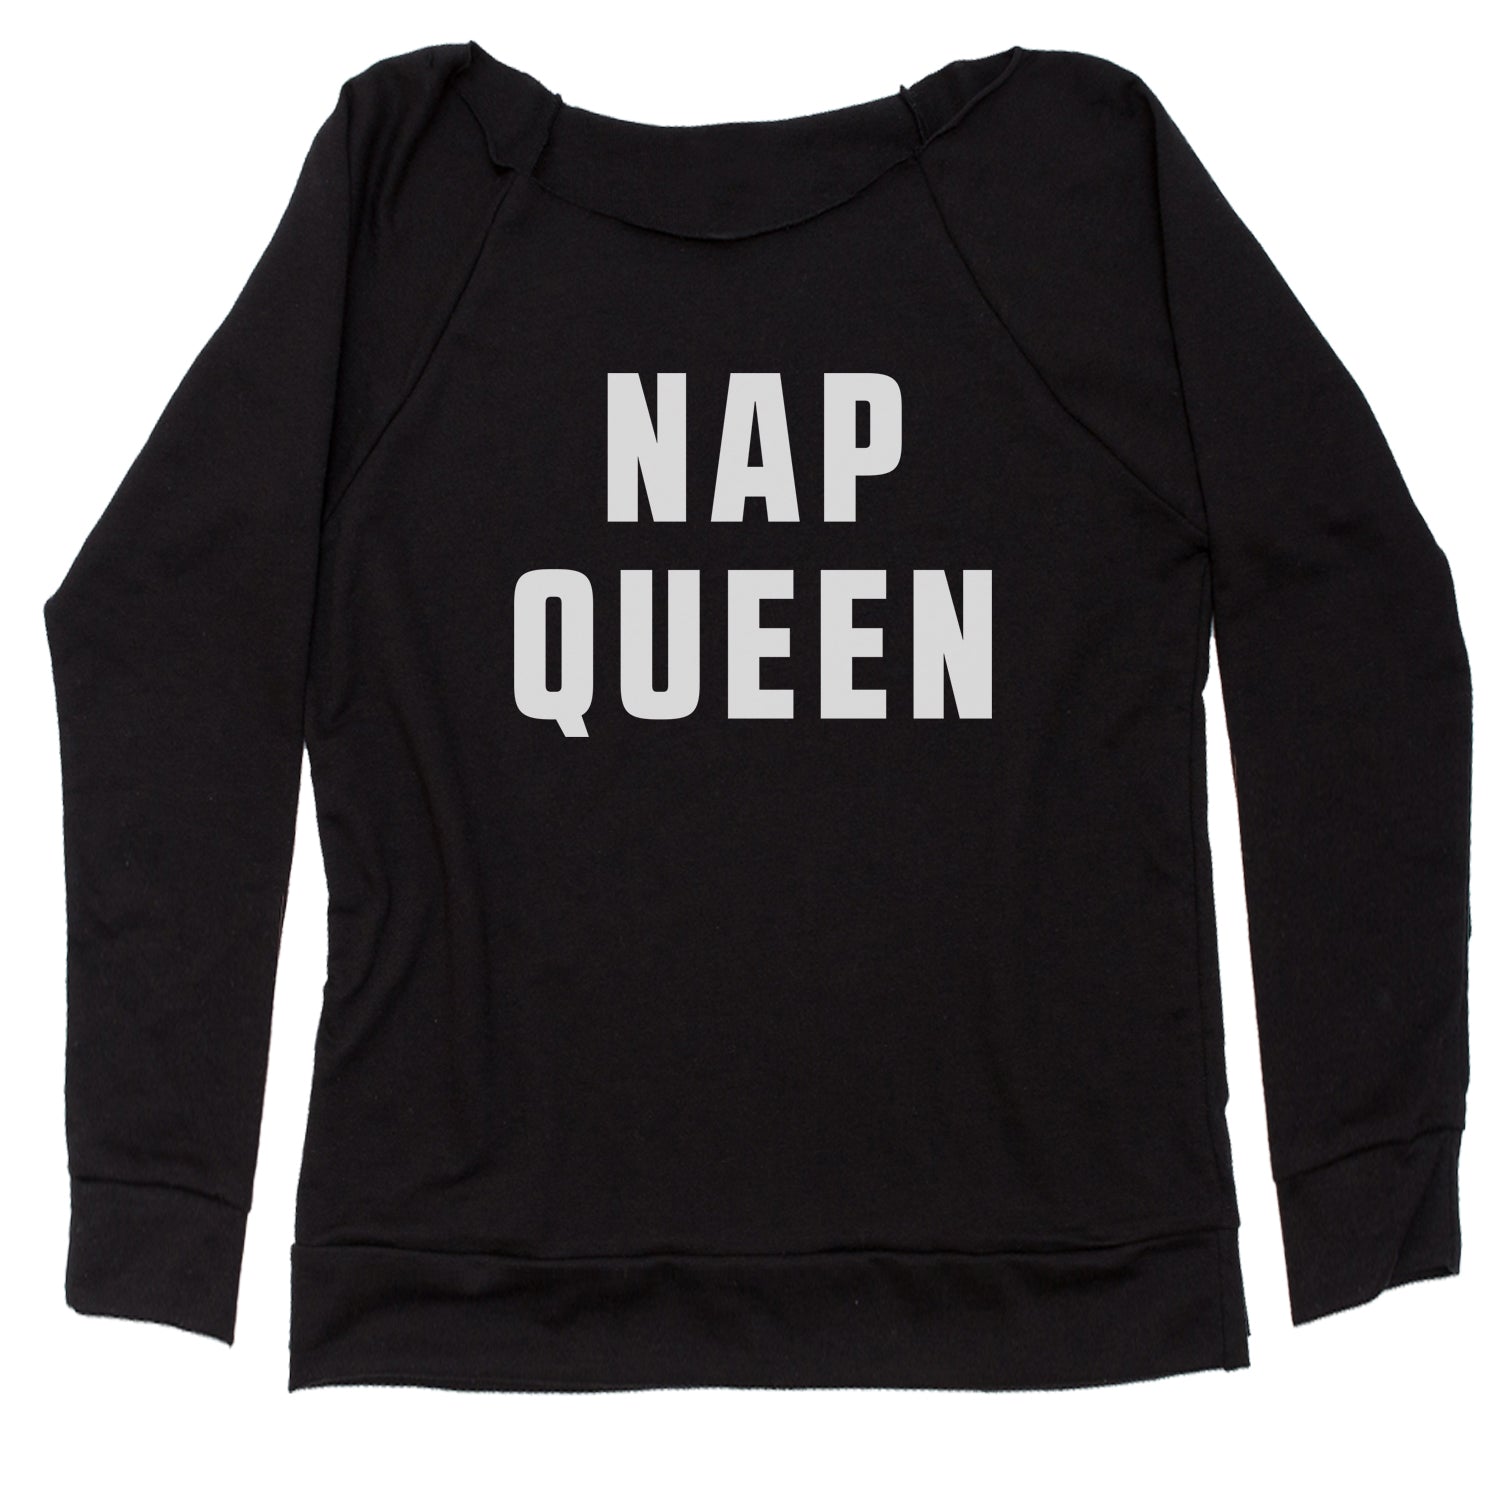 Nap Queen (White Print) Comfy Top For Lazy Days Slouchy Off Shoulder Sweatshirt all, day, function, lazy, nap, pajamas, queen, siesta, sleep, tired, to, too by Expression Tees